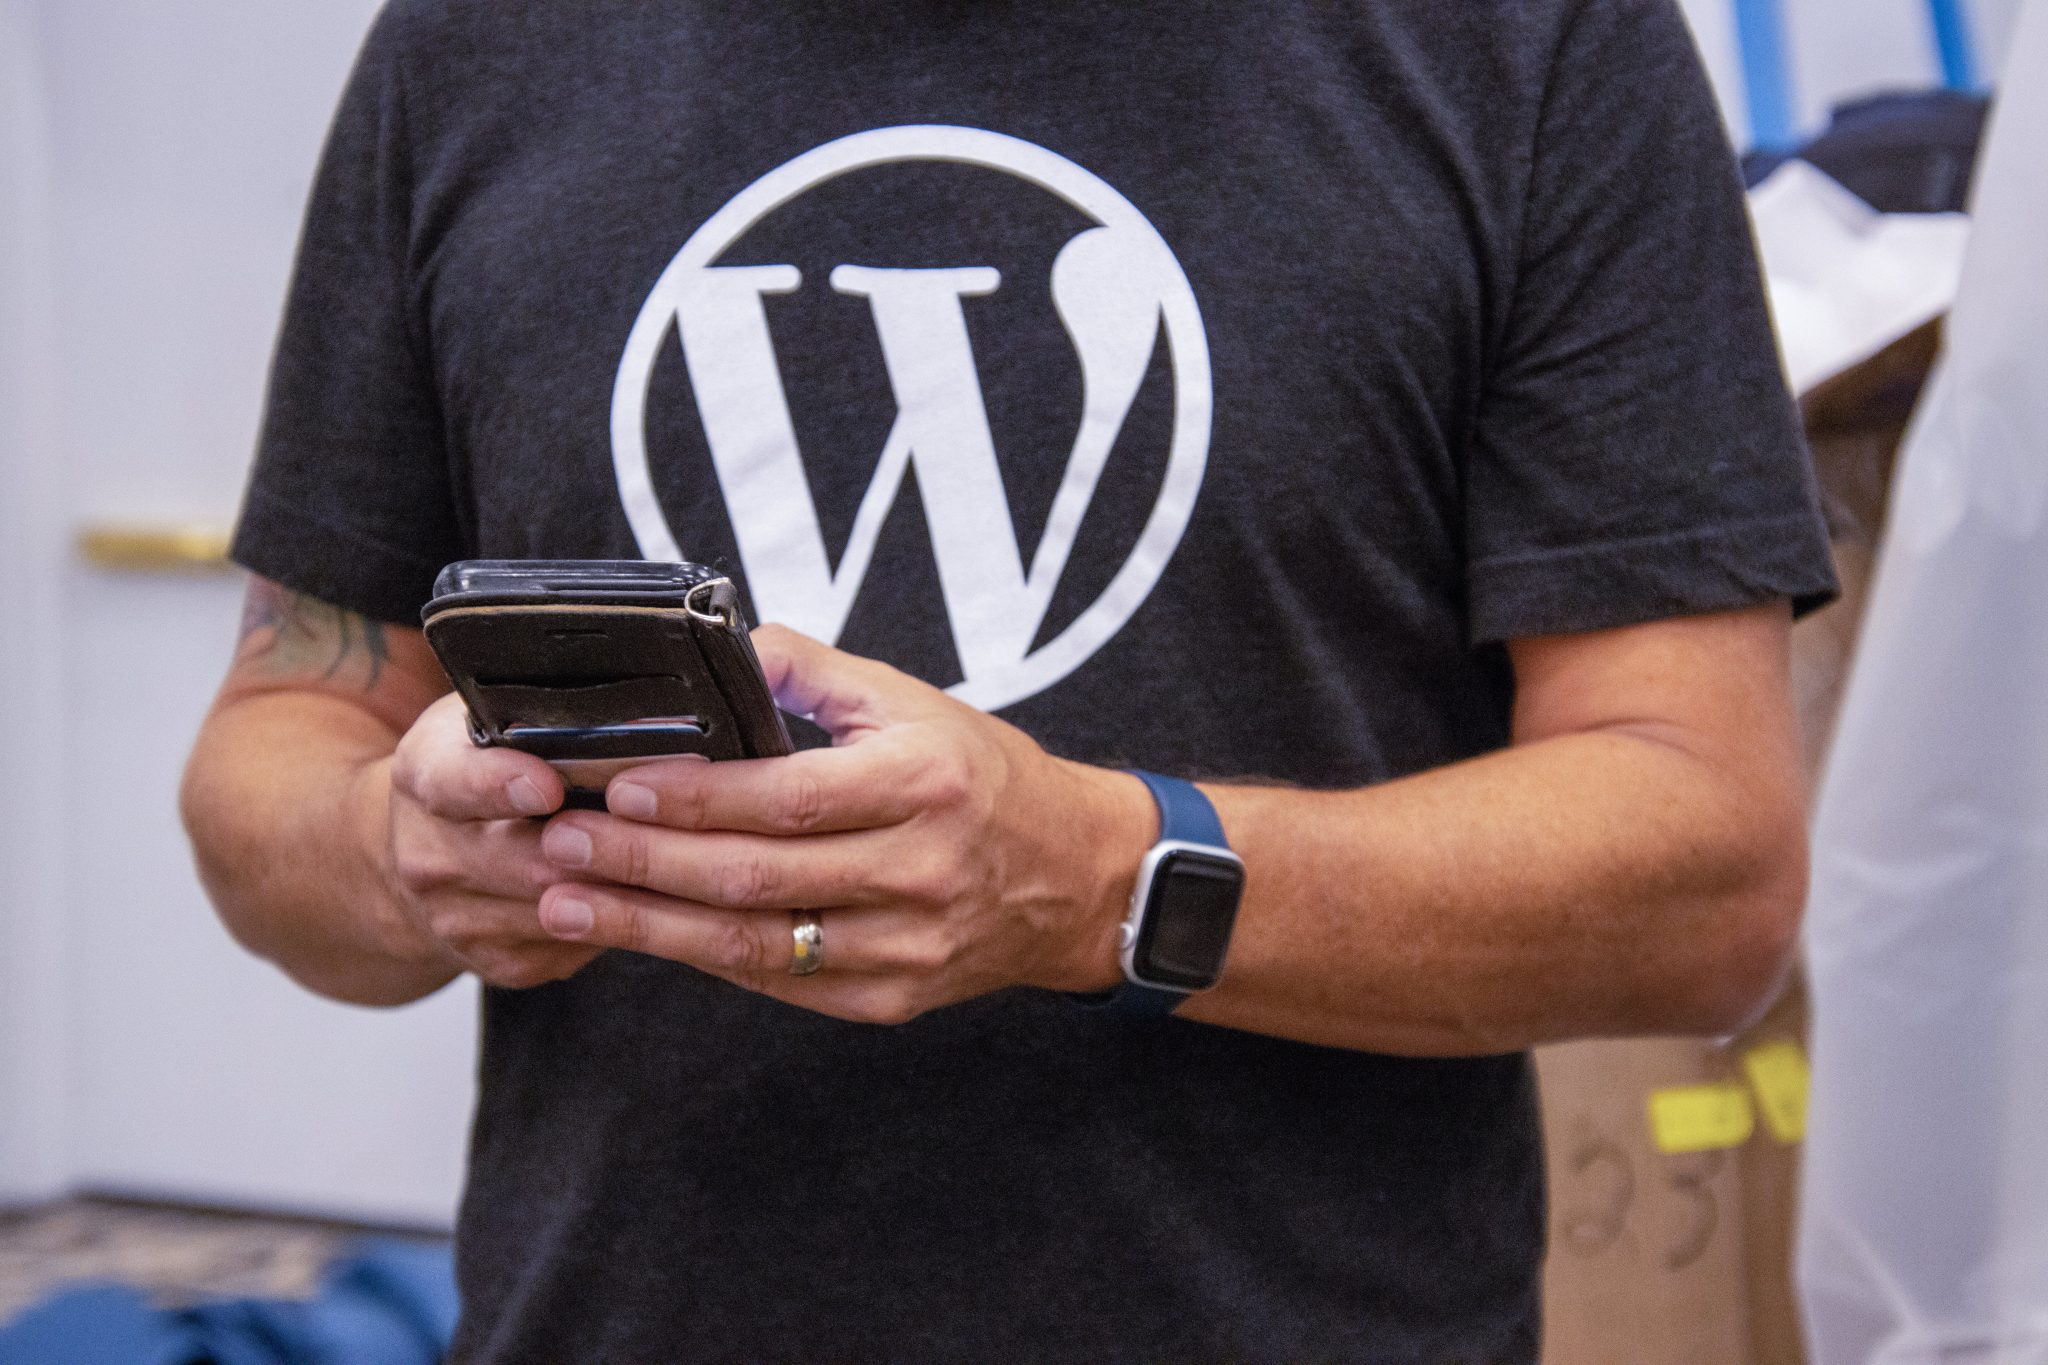 Person with WordPress shirt using a mobile device